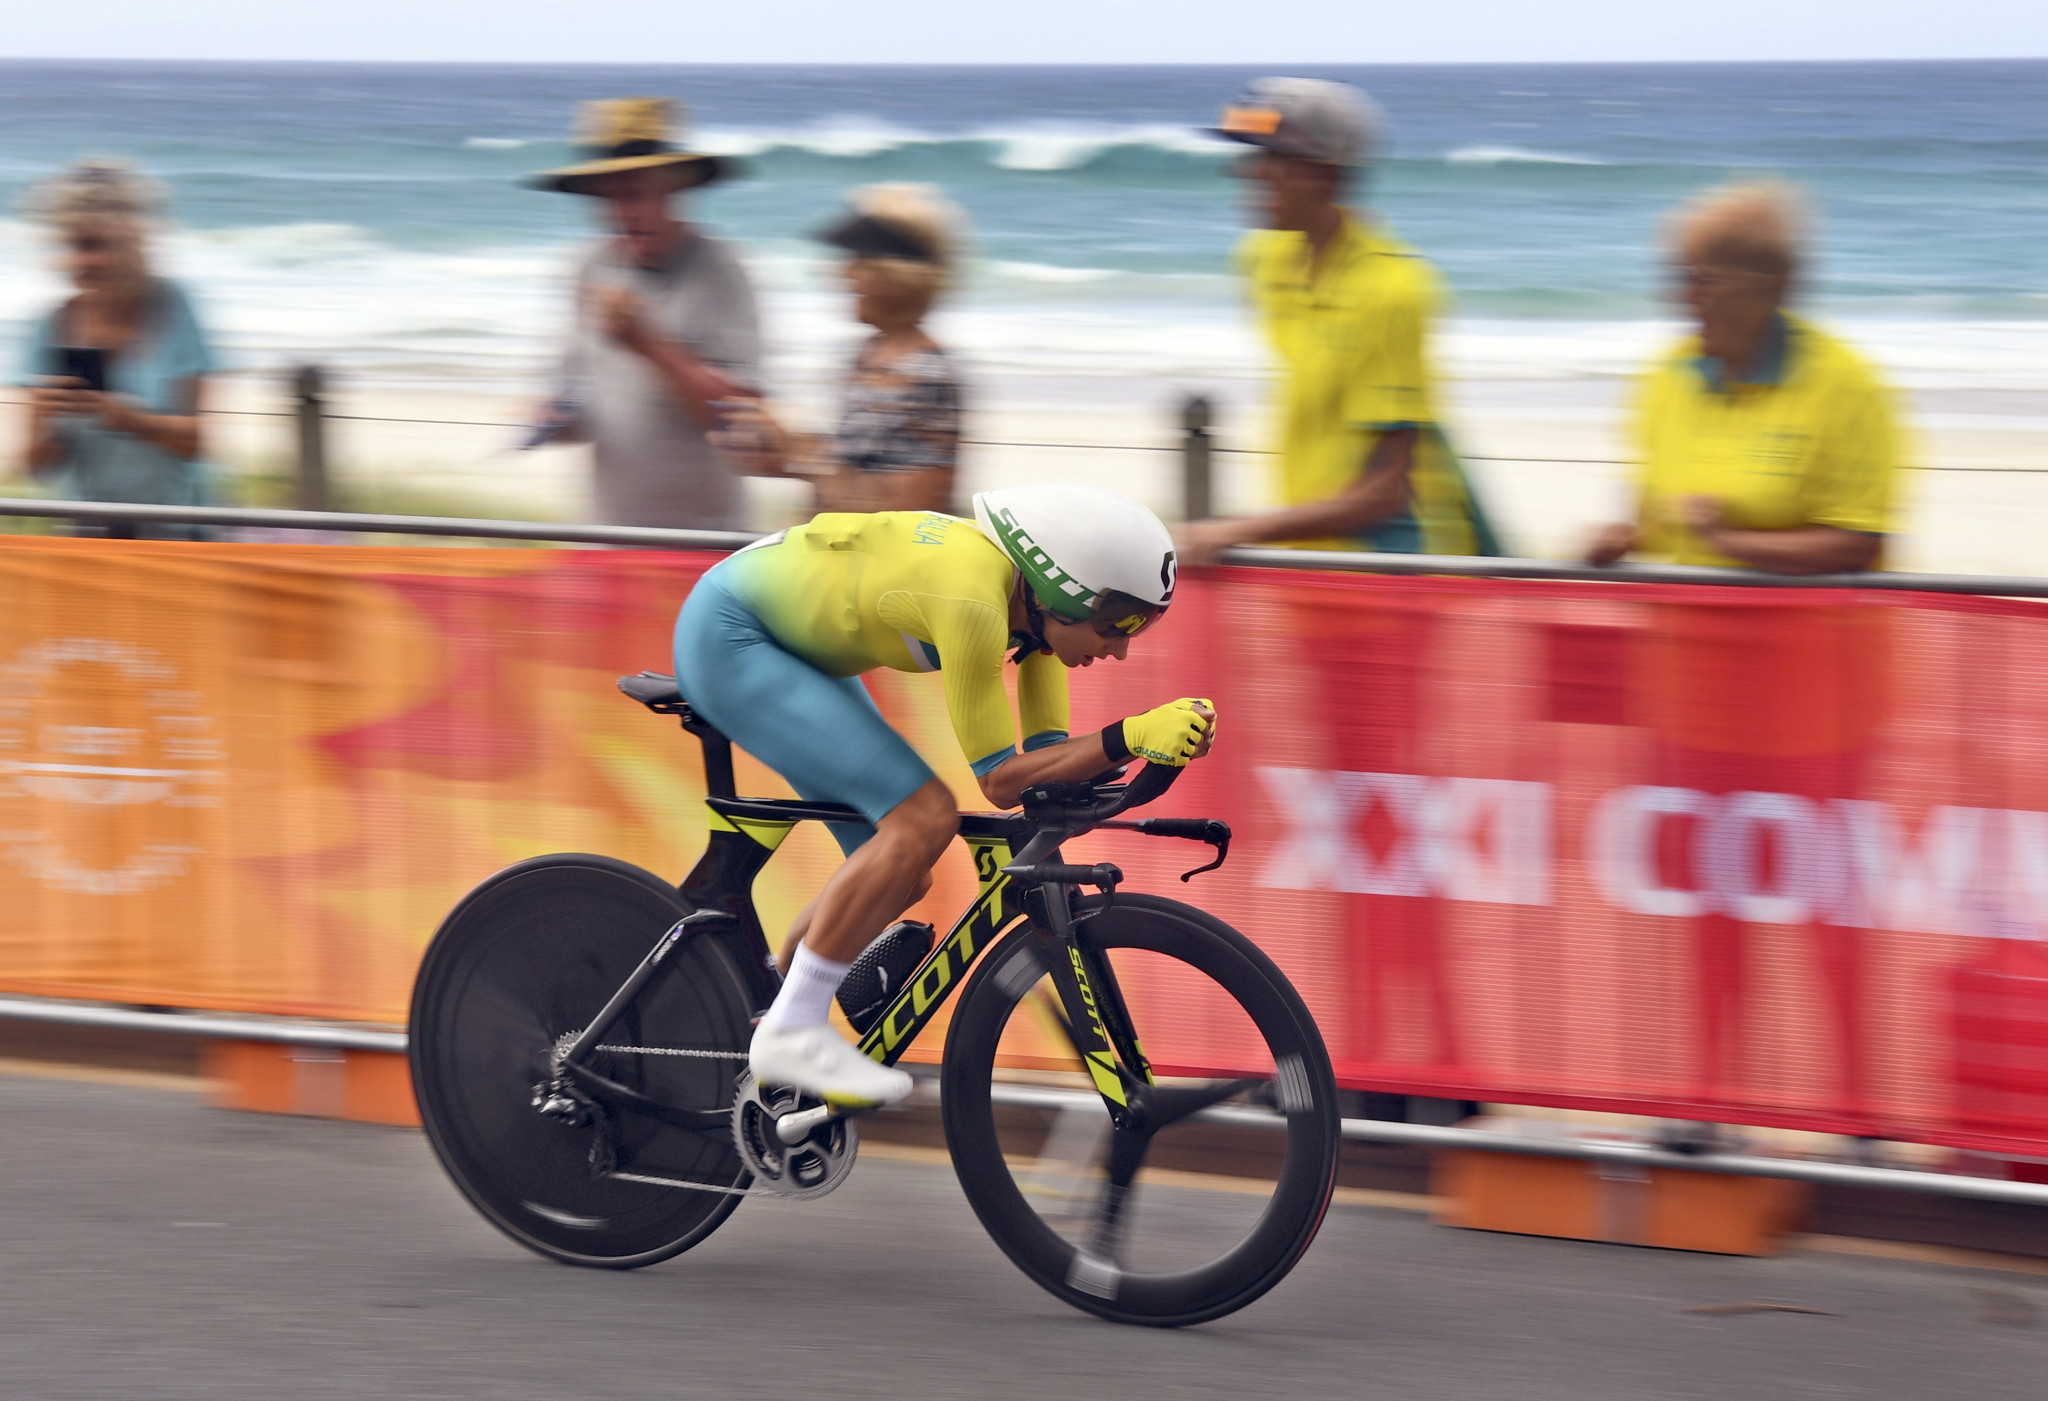 The women's event saw further success for Australia, with Katrin Garfoot proving a class above the rest of the field ©Getty Images